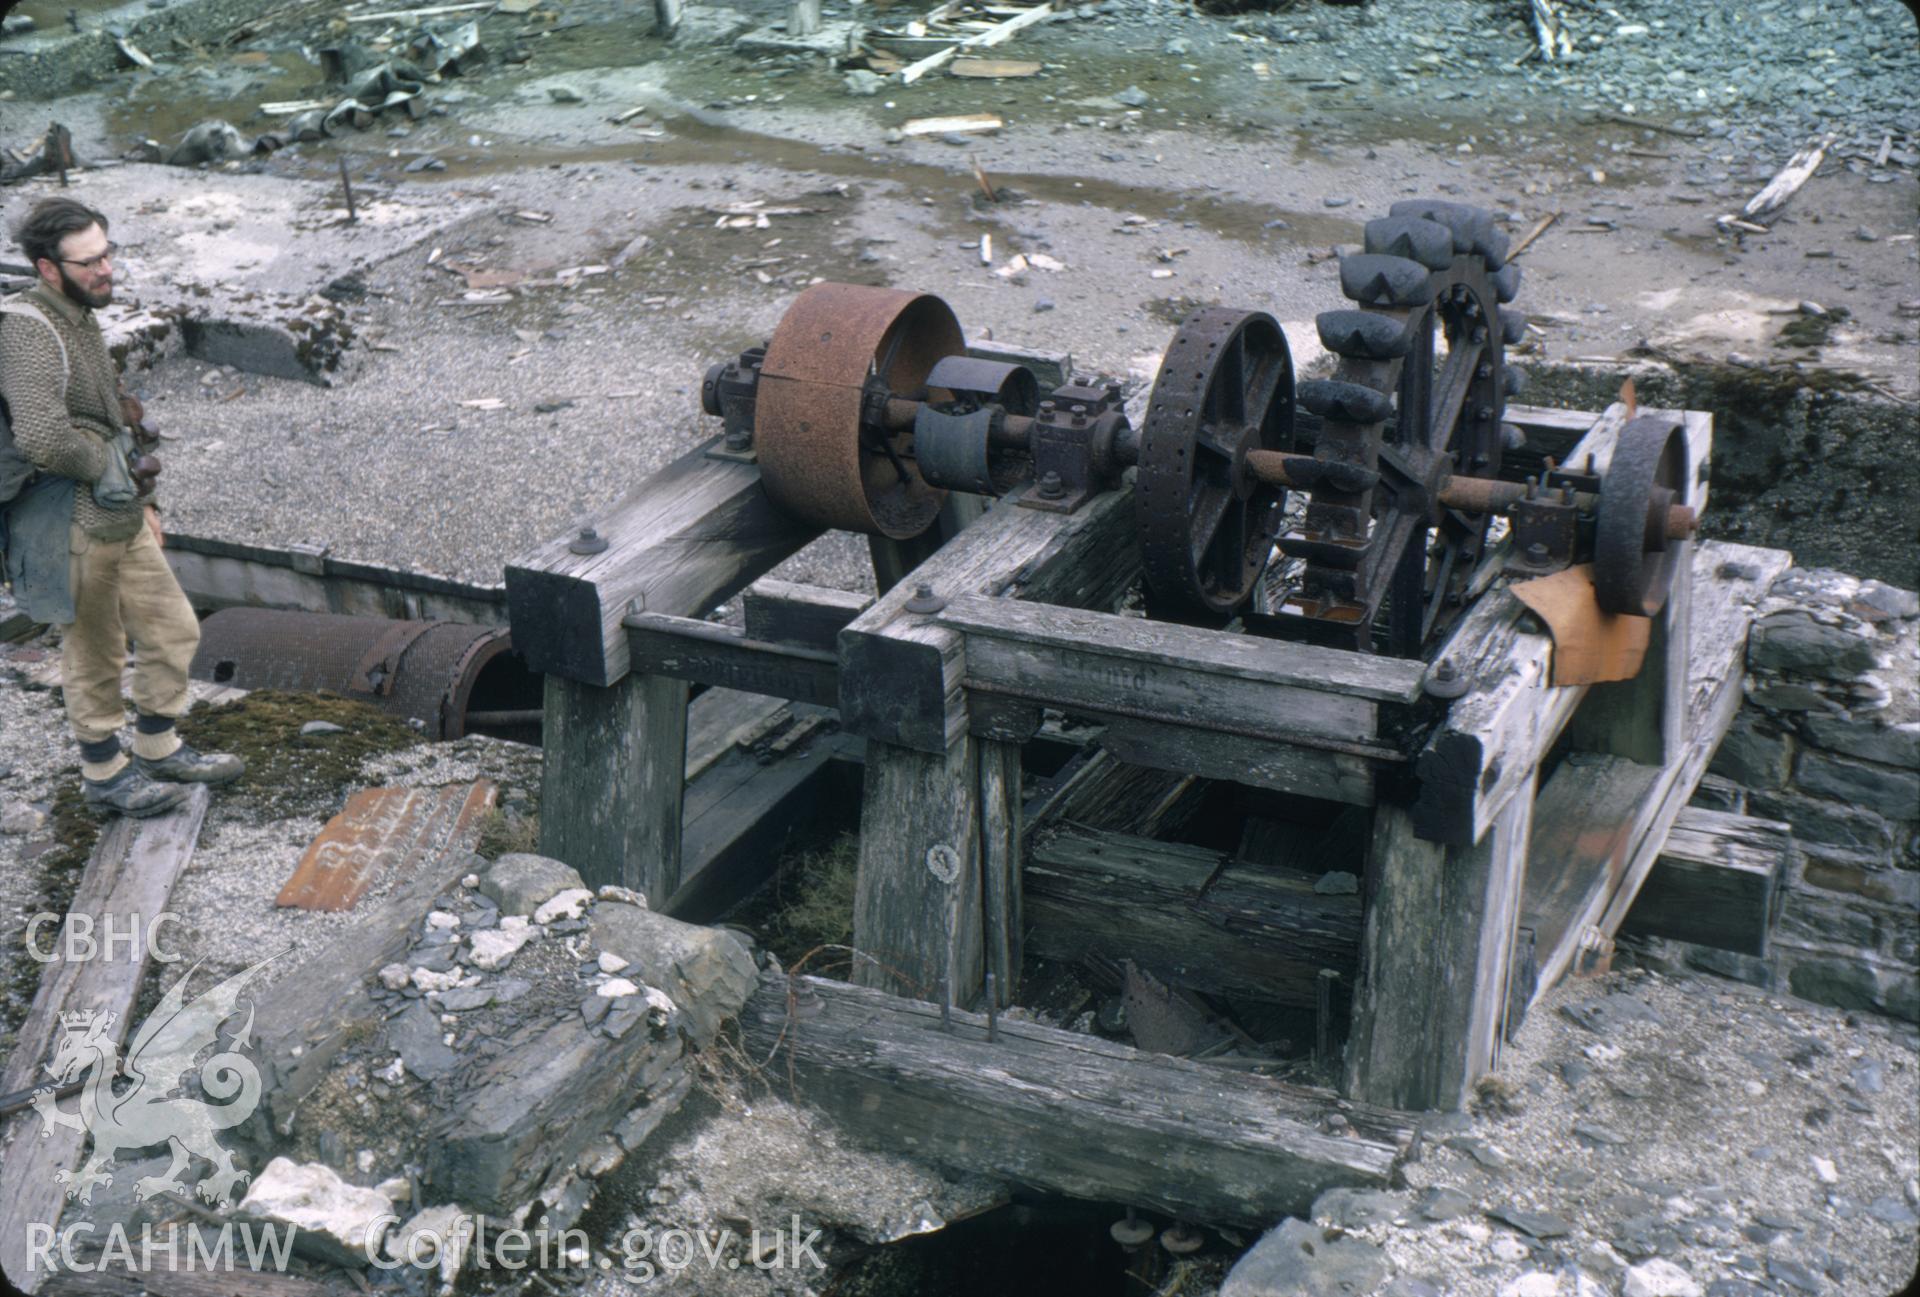 Digitized 35mm slide of Nant Iago Mine Pelton wheel, taken by Christopher J. Williams, and loaned by him for copying.